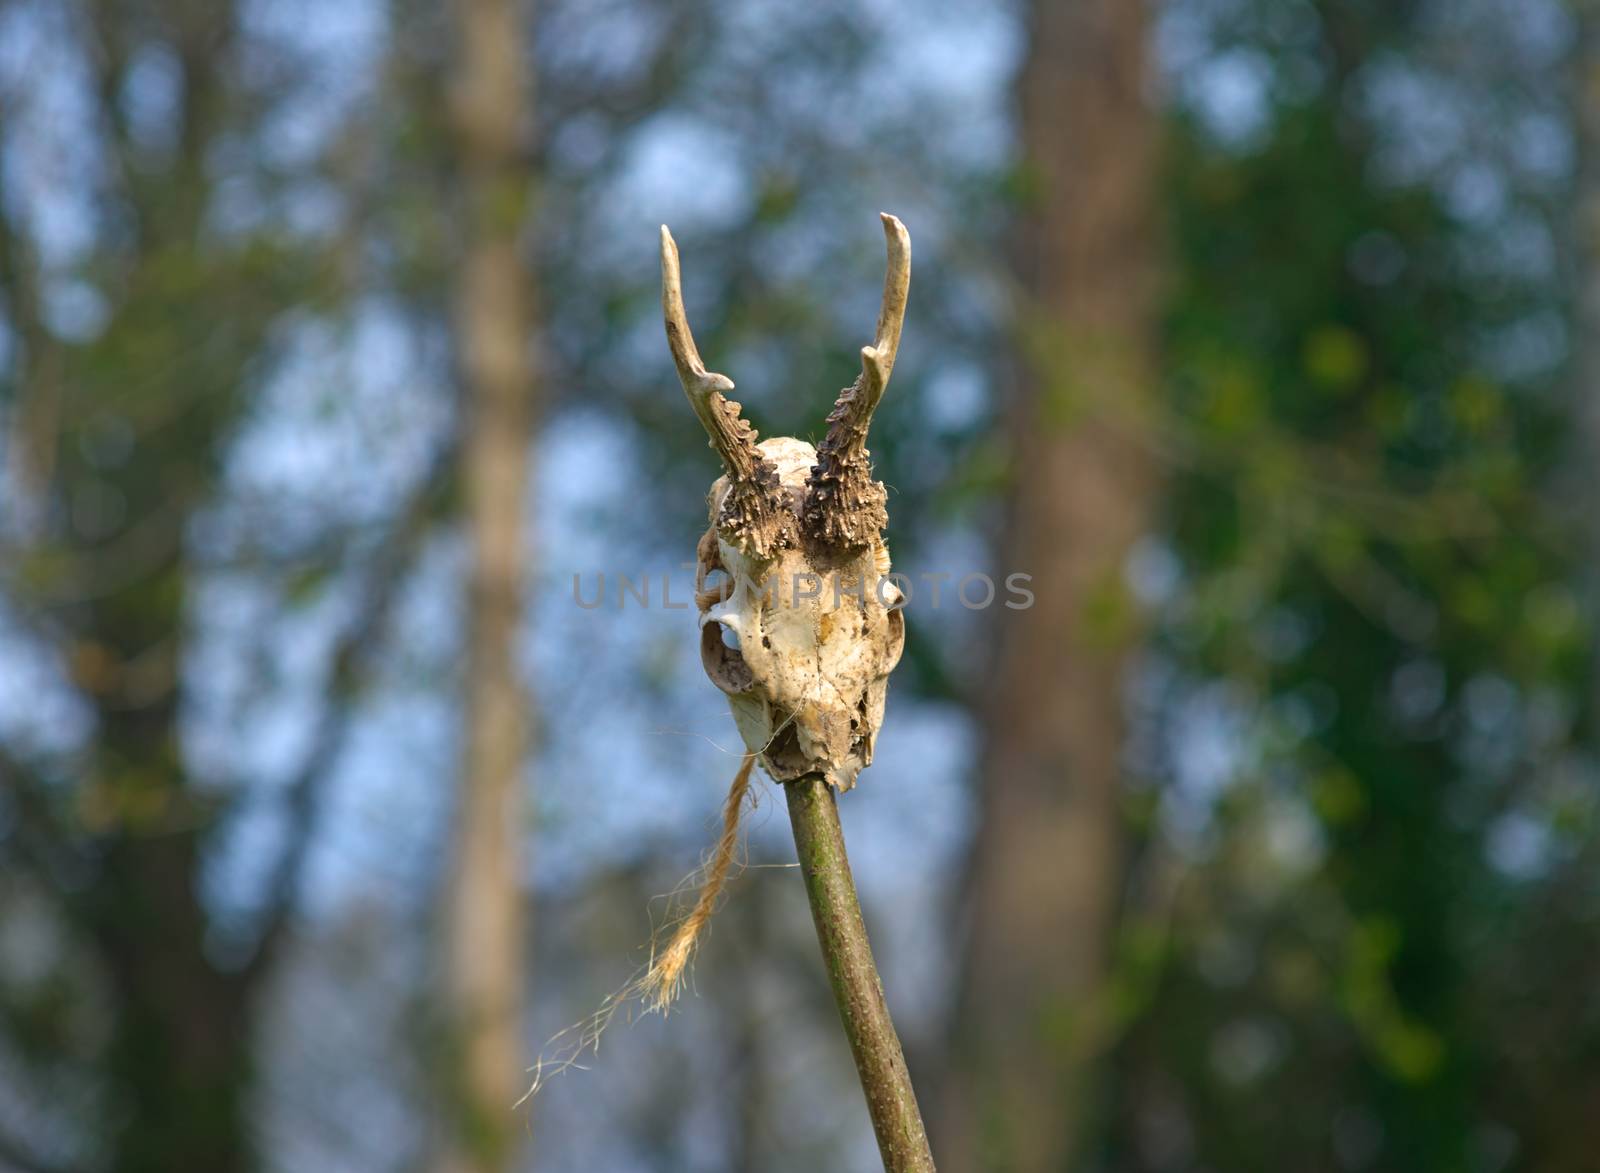 Animal skull with horns on wooden stick with greenery in background by sheriffkule